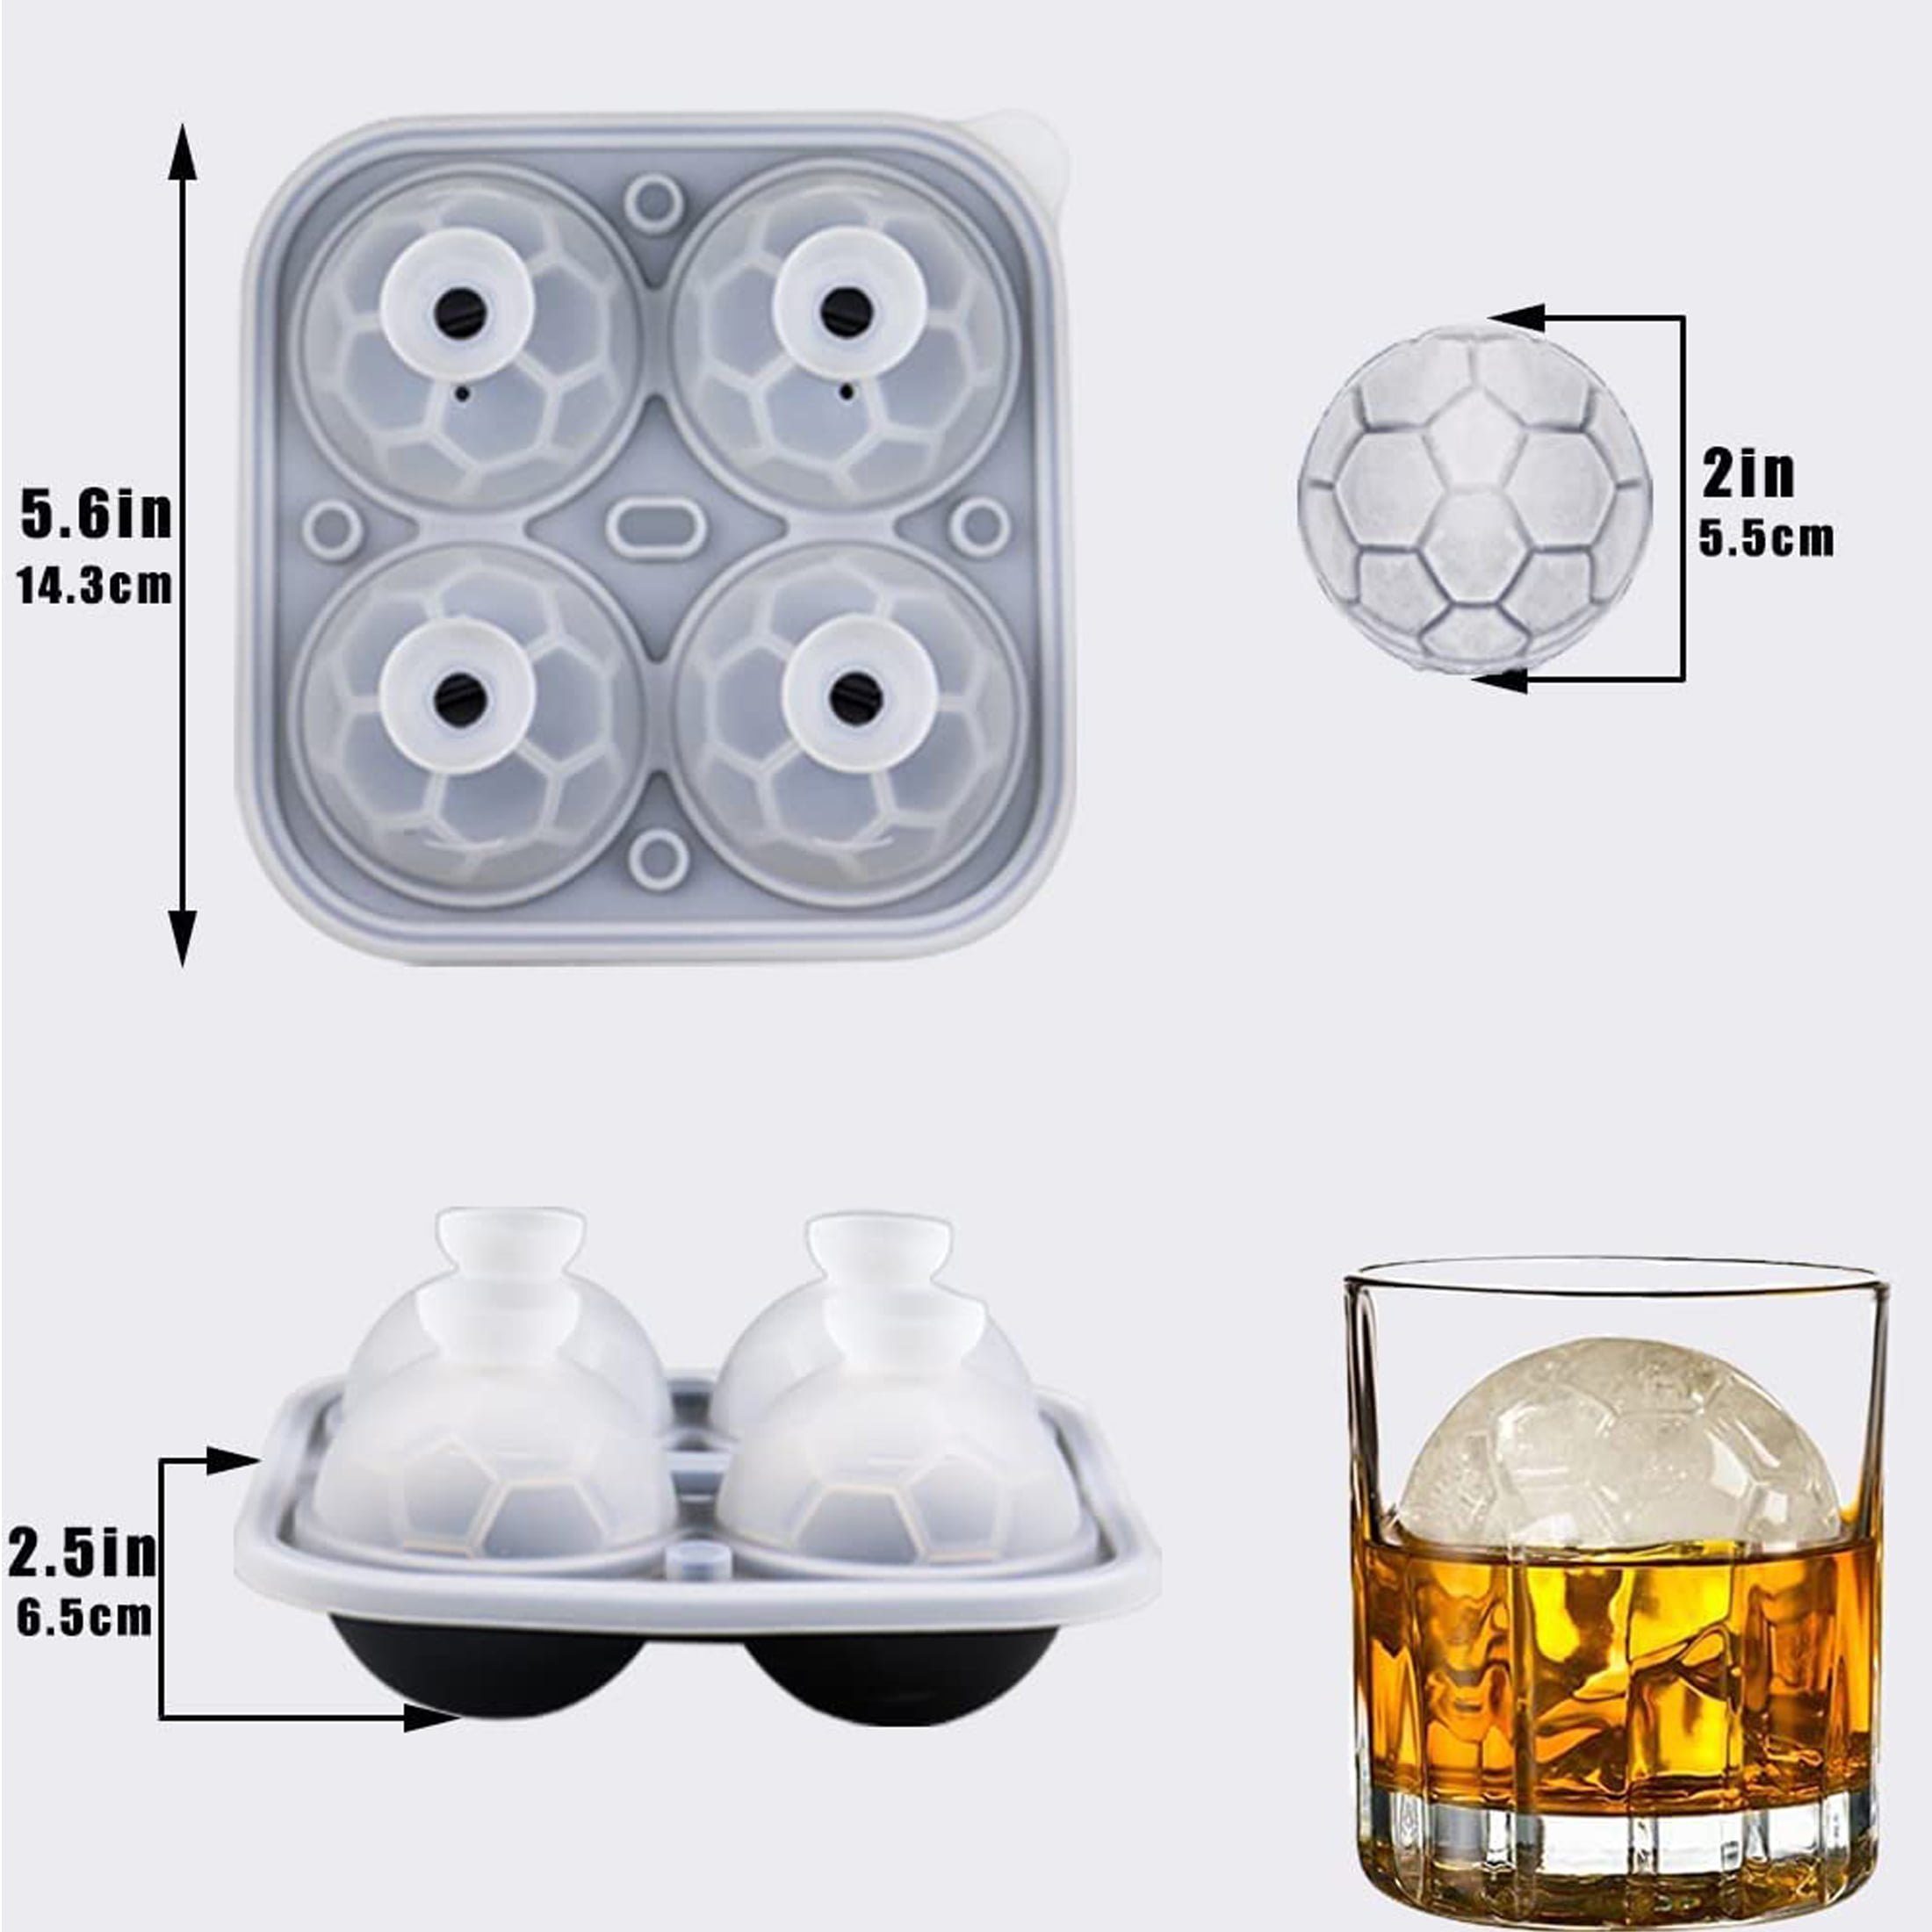 Large 3d Rose Ice Cube Mold - Silicone Rubber Fun Ice Cub For